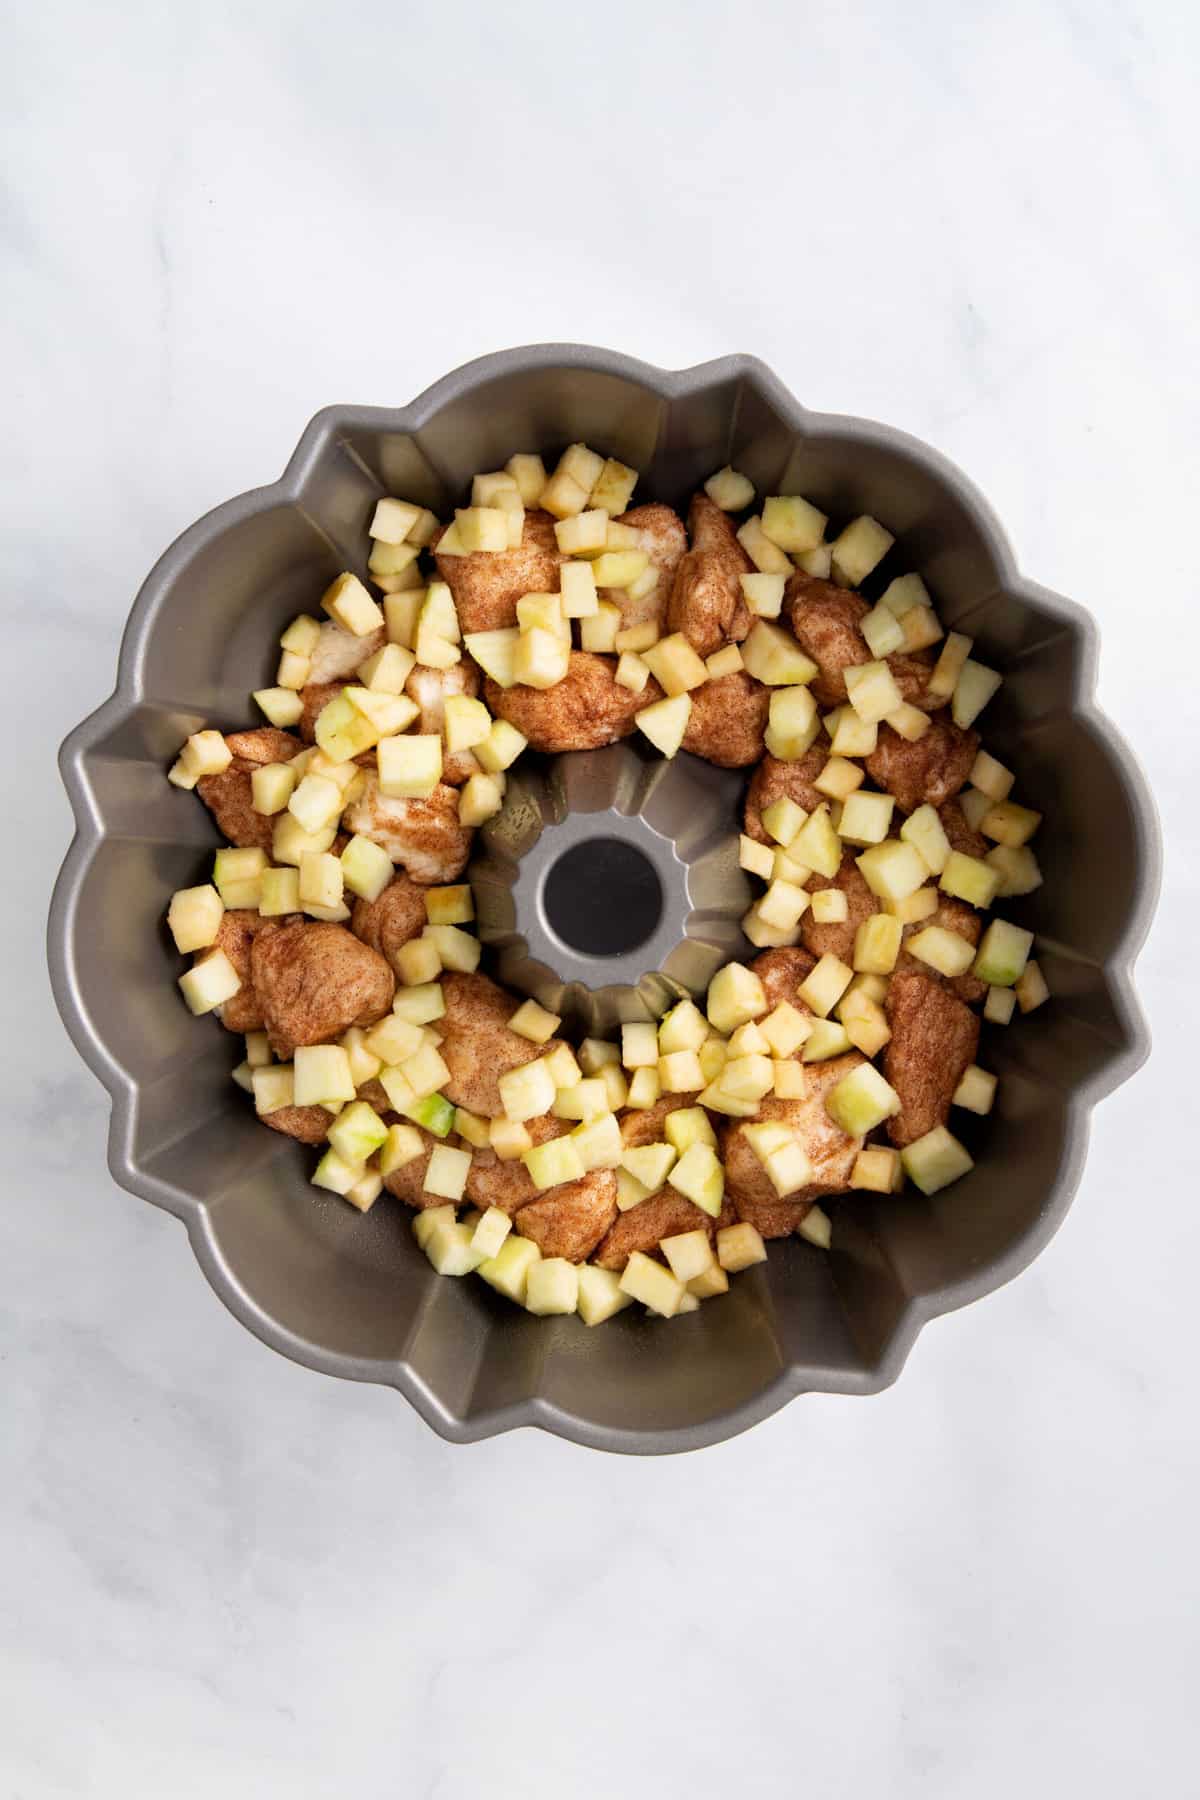 cinnamon dough pieces and chopped granny smith apples lining the bottom of a bundt cake tin